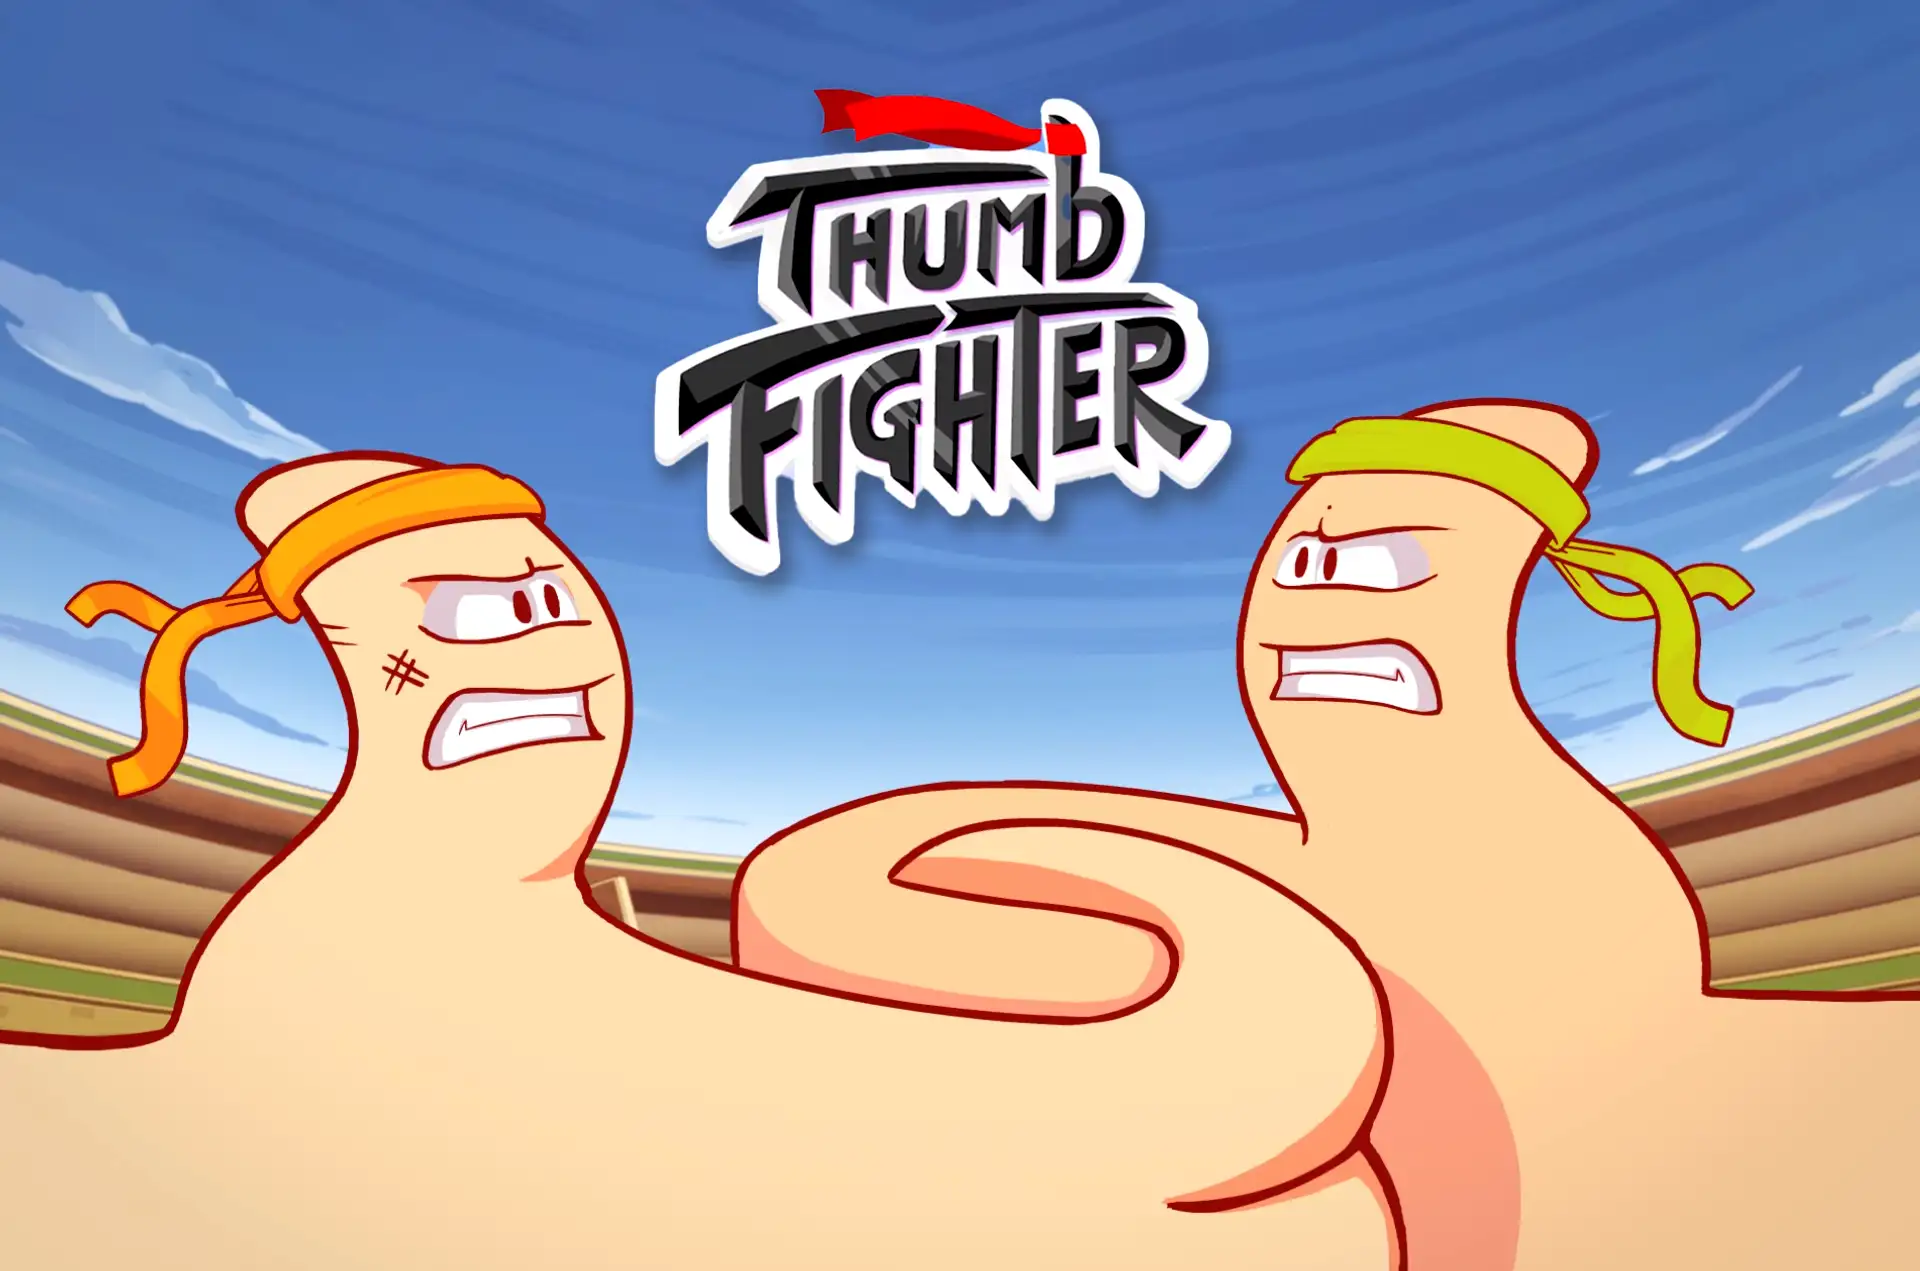 presenting you Thumb Fighter